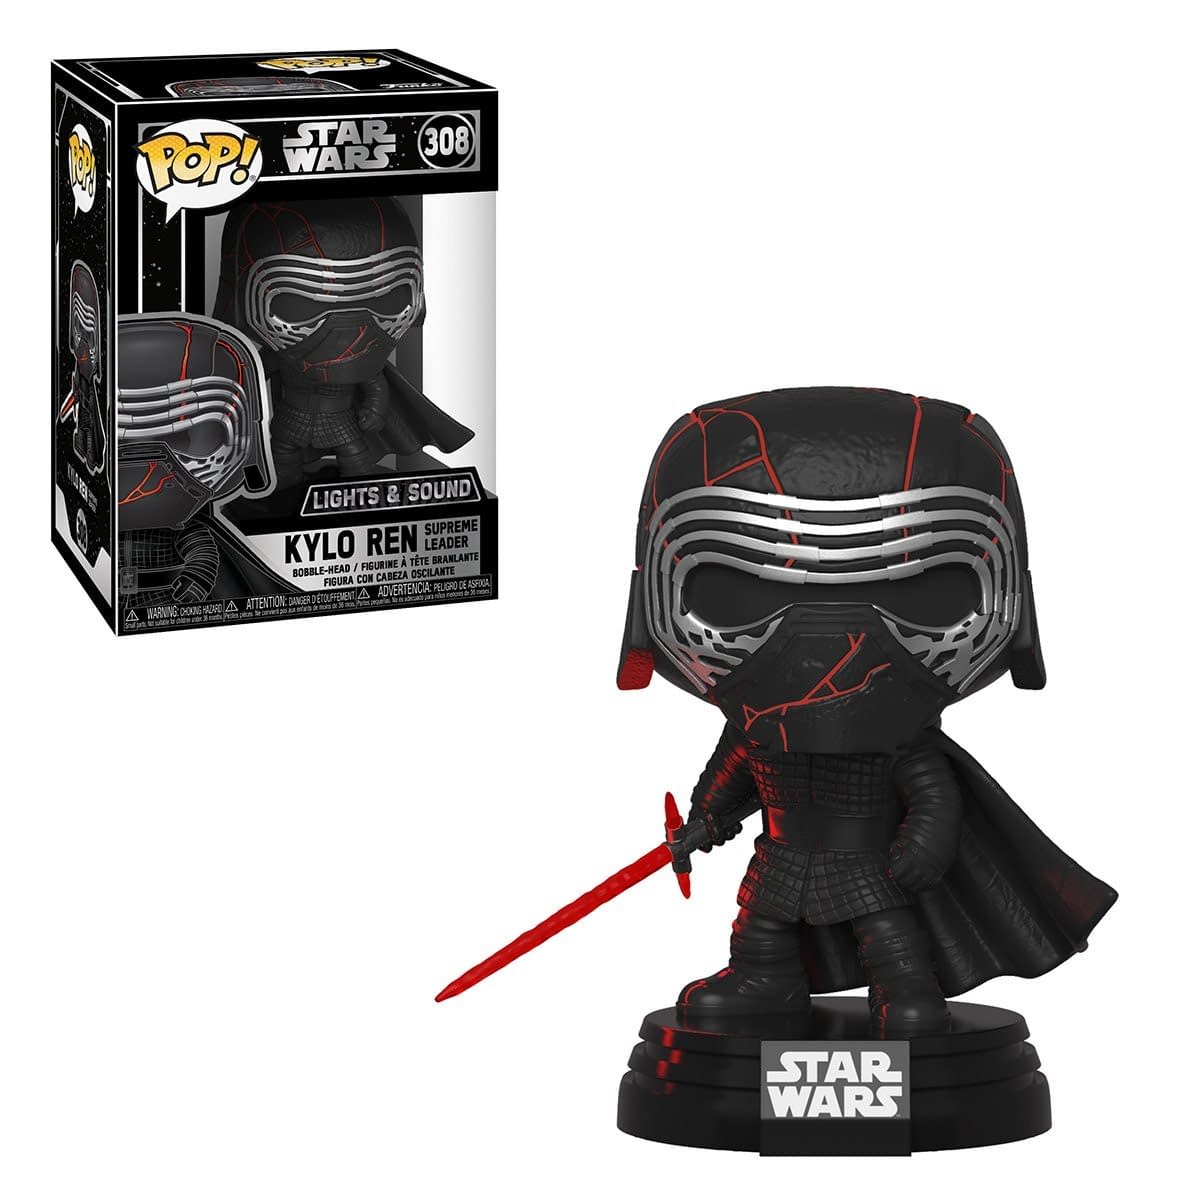 Kylo Ren Collectibles That Are Perfect for Your Collection